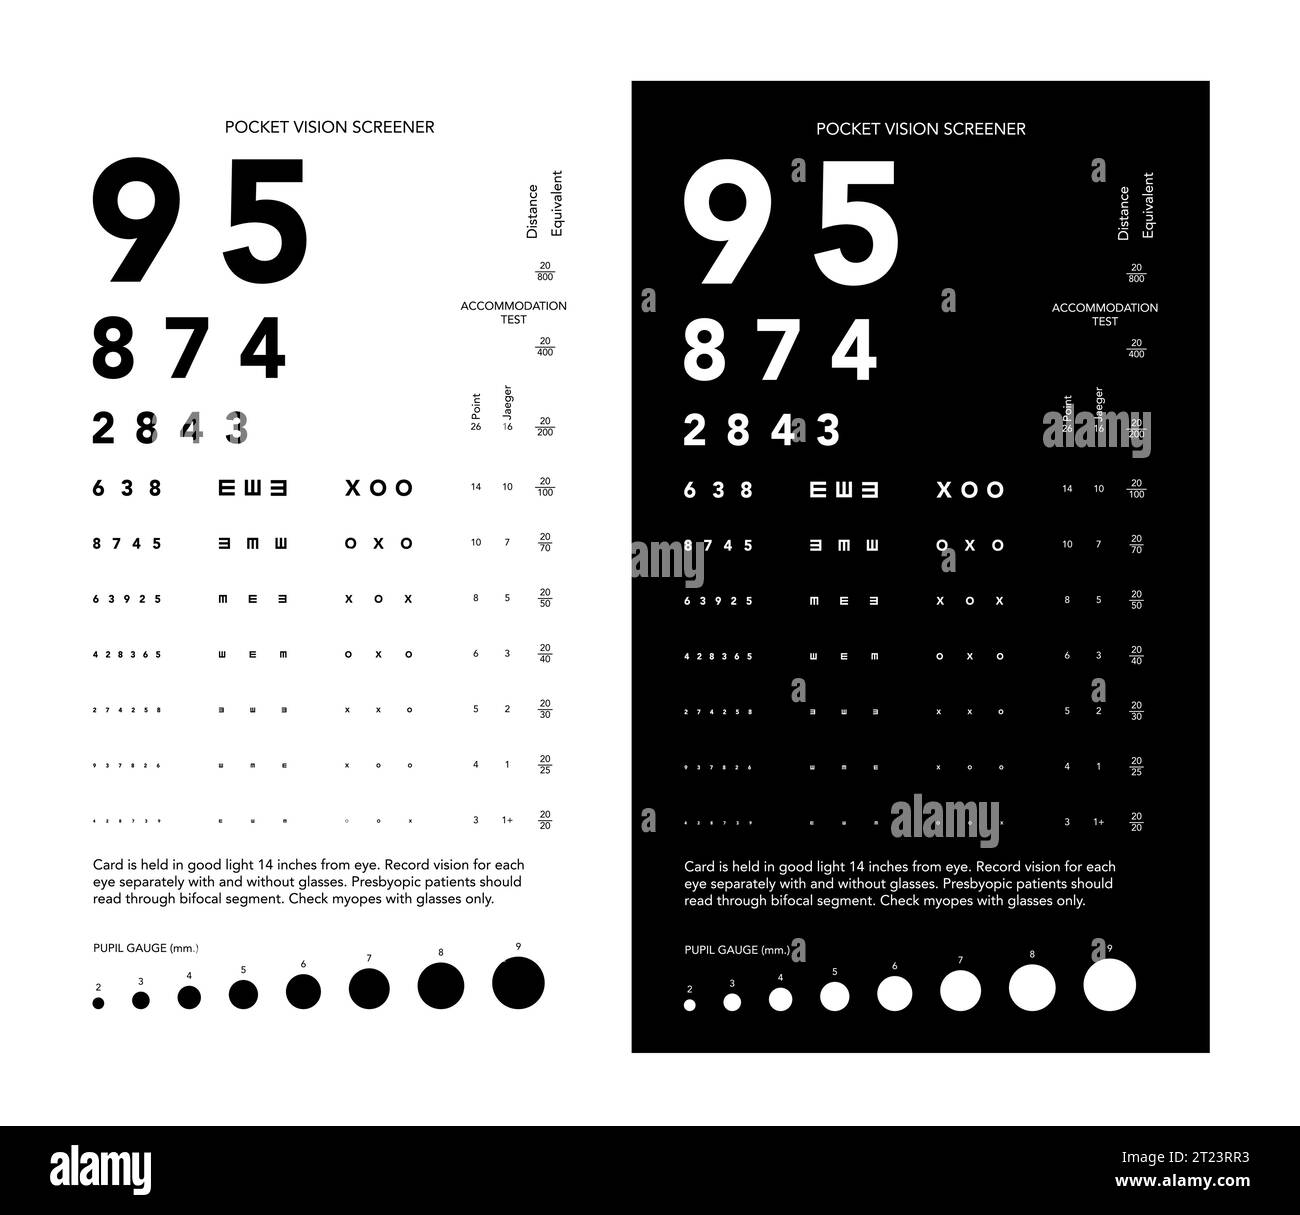 Rosenbaum Pocket Vision Screener Eye Test Chart medical illustration with numbers. Line vector sketch style isolated on white, black background. Vision board optometrist ophthalmic for examination Stock Vector